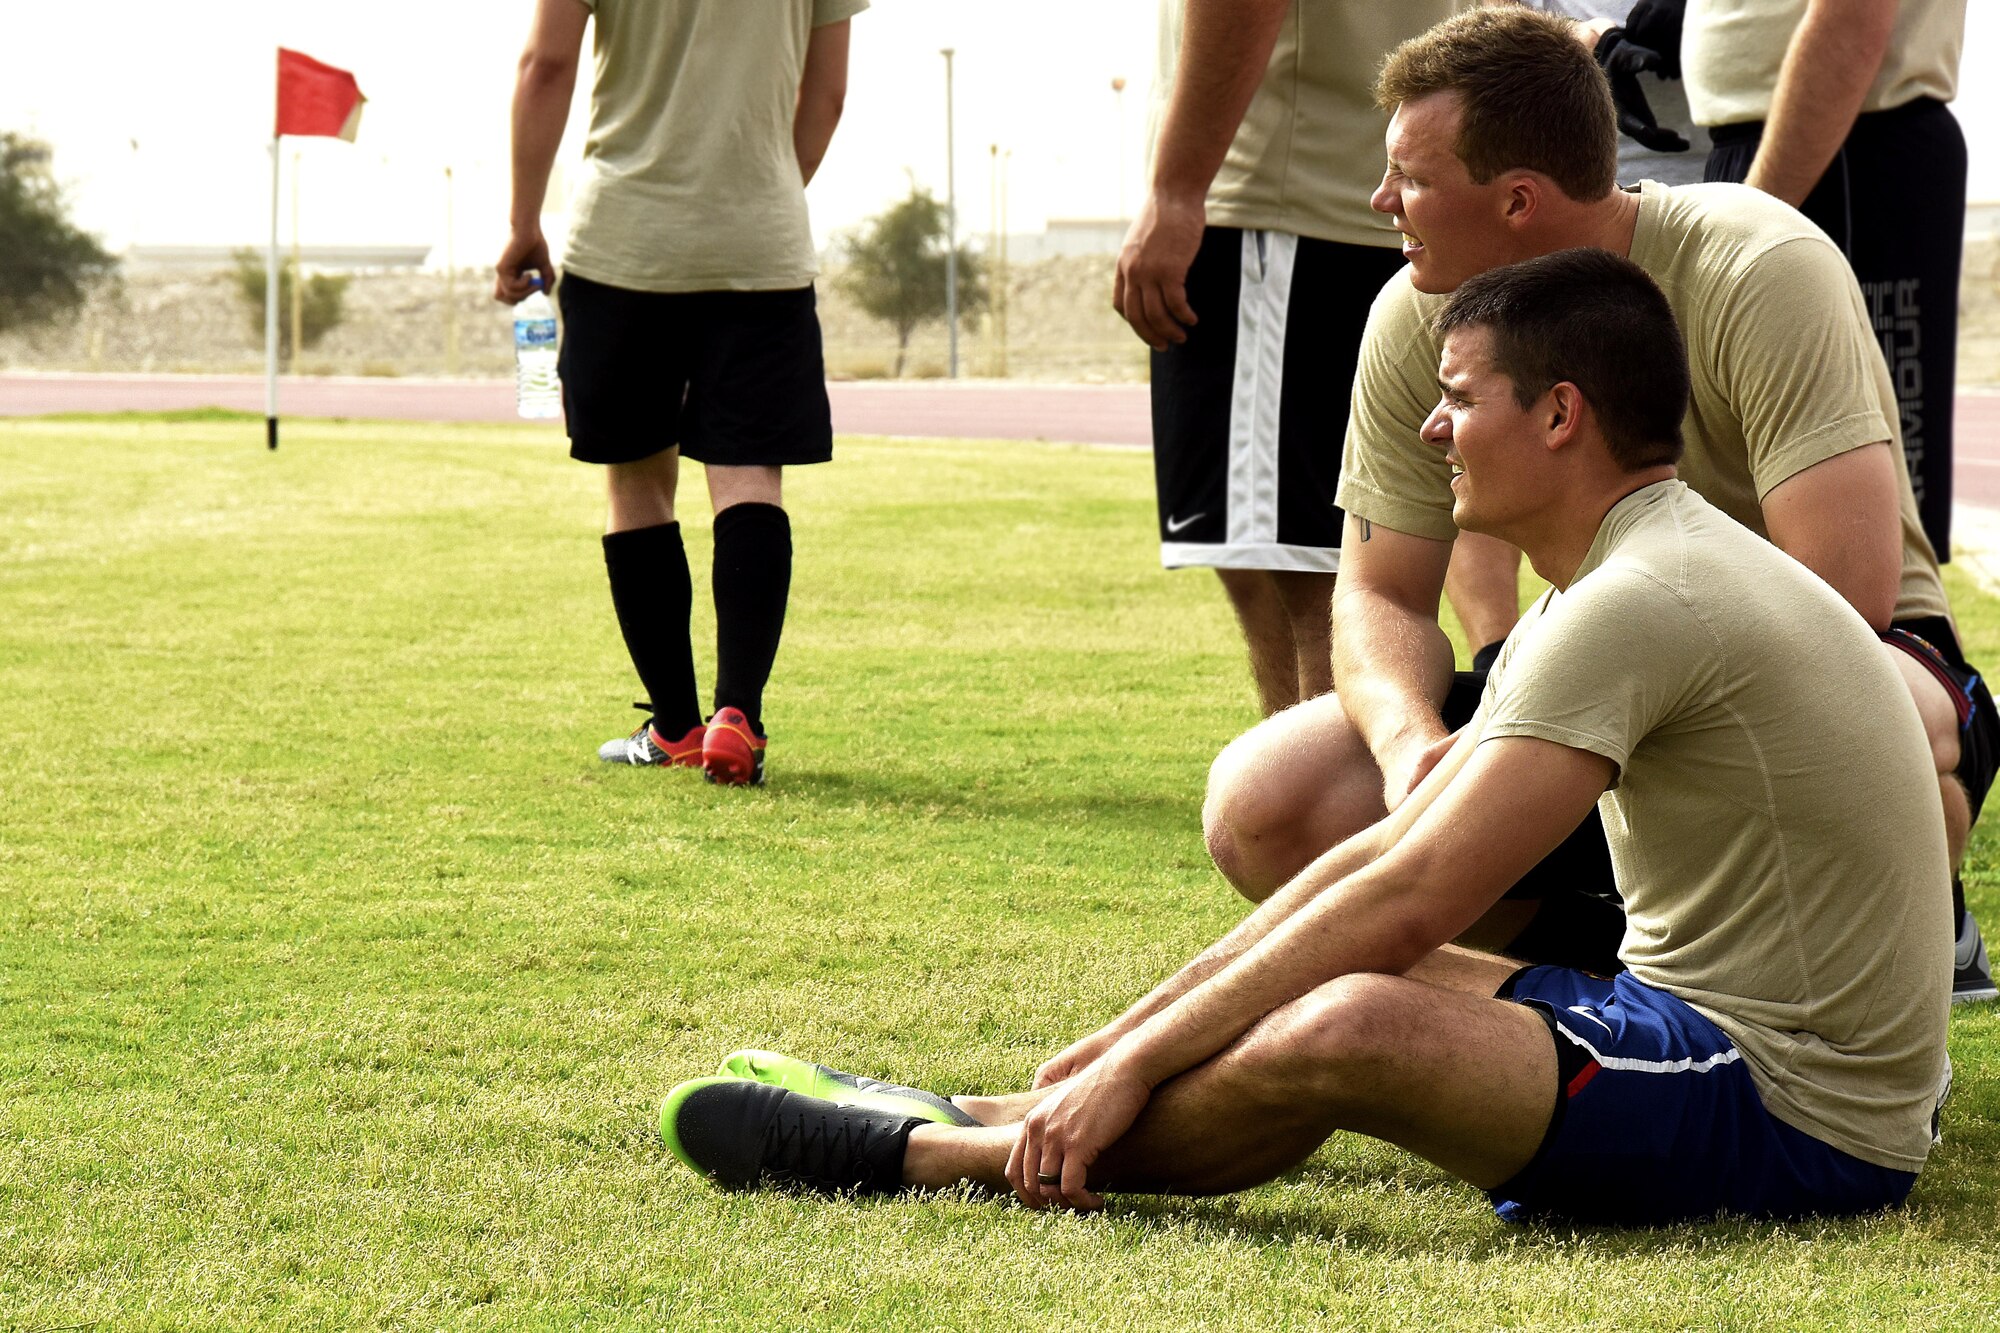 U.S. Air Force Airmen with the 379th Expeditionary Security Forces Squadron rest between halves during a soccer game with Qatar Emiri Air Force Security Forces members at Al Udeid Air Base, Qatar, March 23, 2017. The Airmen who participated in the game and those who went to support their team had the chance to interact with their host nation counterparts during the friendly match. (U.S. Air Force photo by Senior Airman Cynthia A. Innocenti)